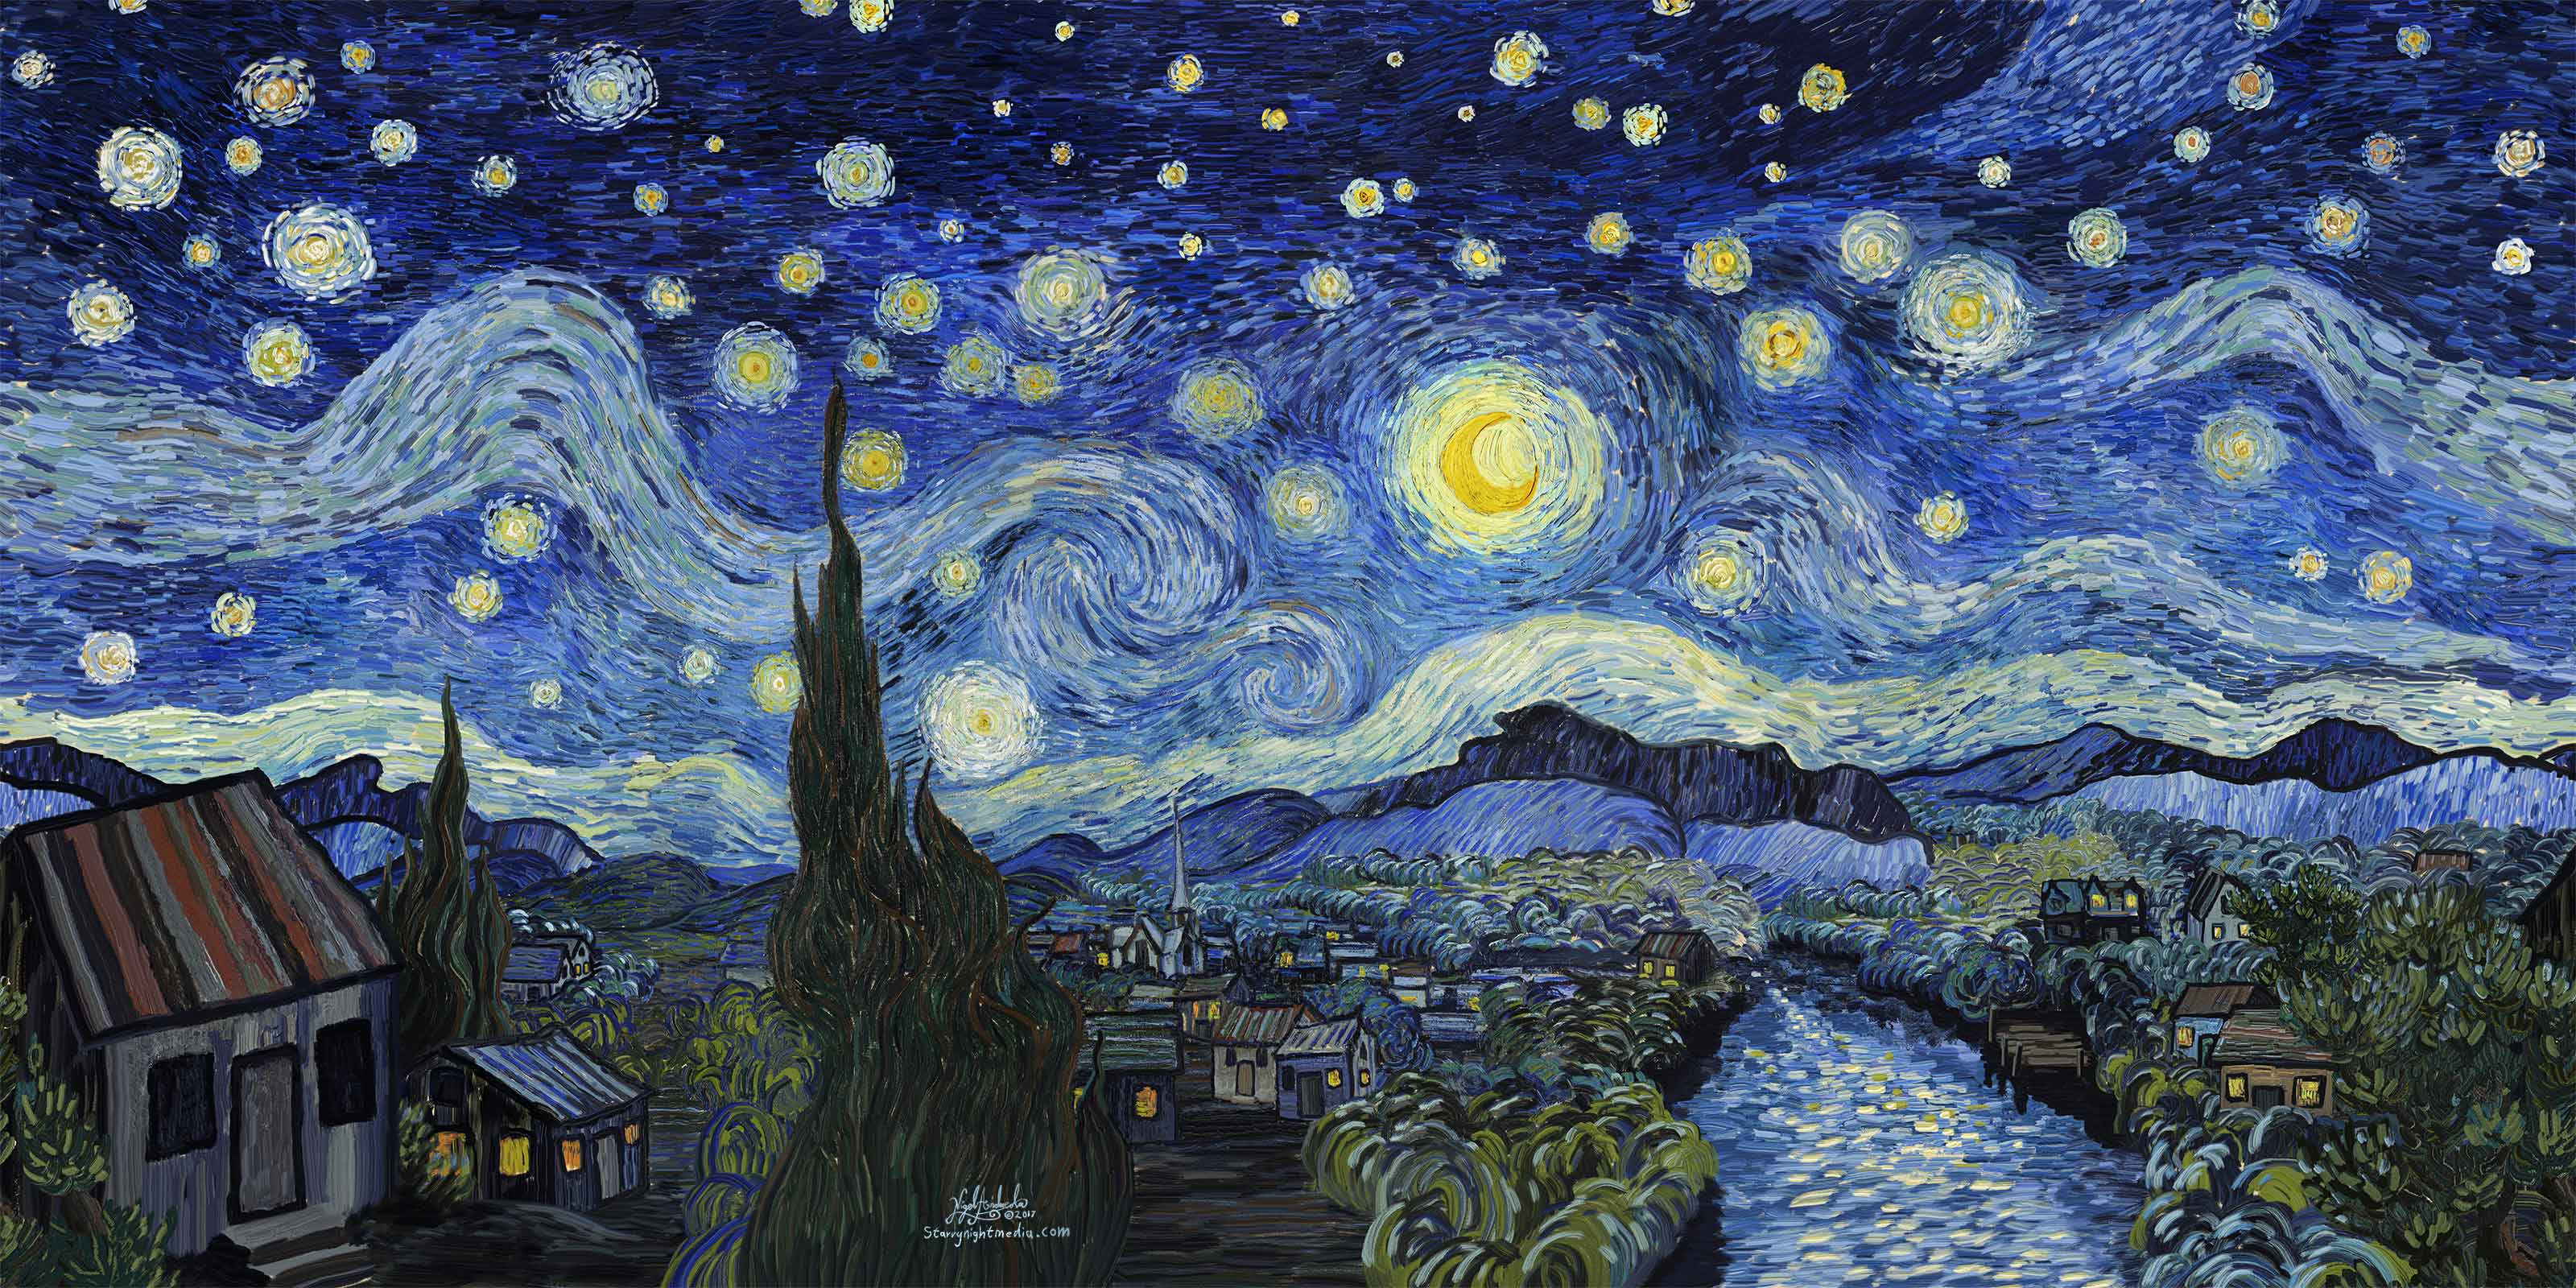 Starry Night By Van Gogh and Nigel Andreola. Van Gogh’s Starry Night has captured the imagination of countless millions. It has become one of the most popular fine art pieces of our generation. Here at Starry Night Media Van Gogh and his bold colorful paintings are the inspiration behind our marketing approach. We planned to use his famous painting as our website background. Its square aspect did not nicely fill the displays of most contemporary devices. We employed artist Nigel Andreola to match the impasto technique used by Van Gogh and expand his work in a way no other has yet equaled.